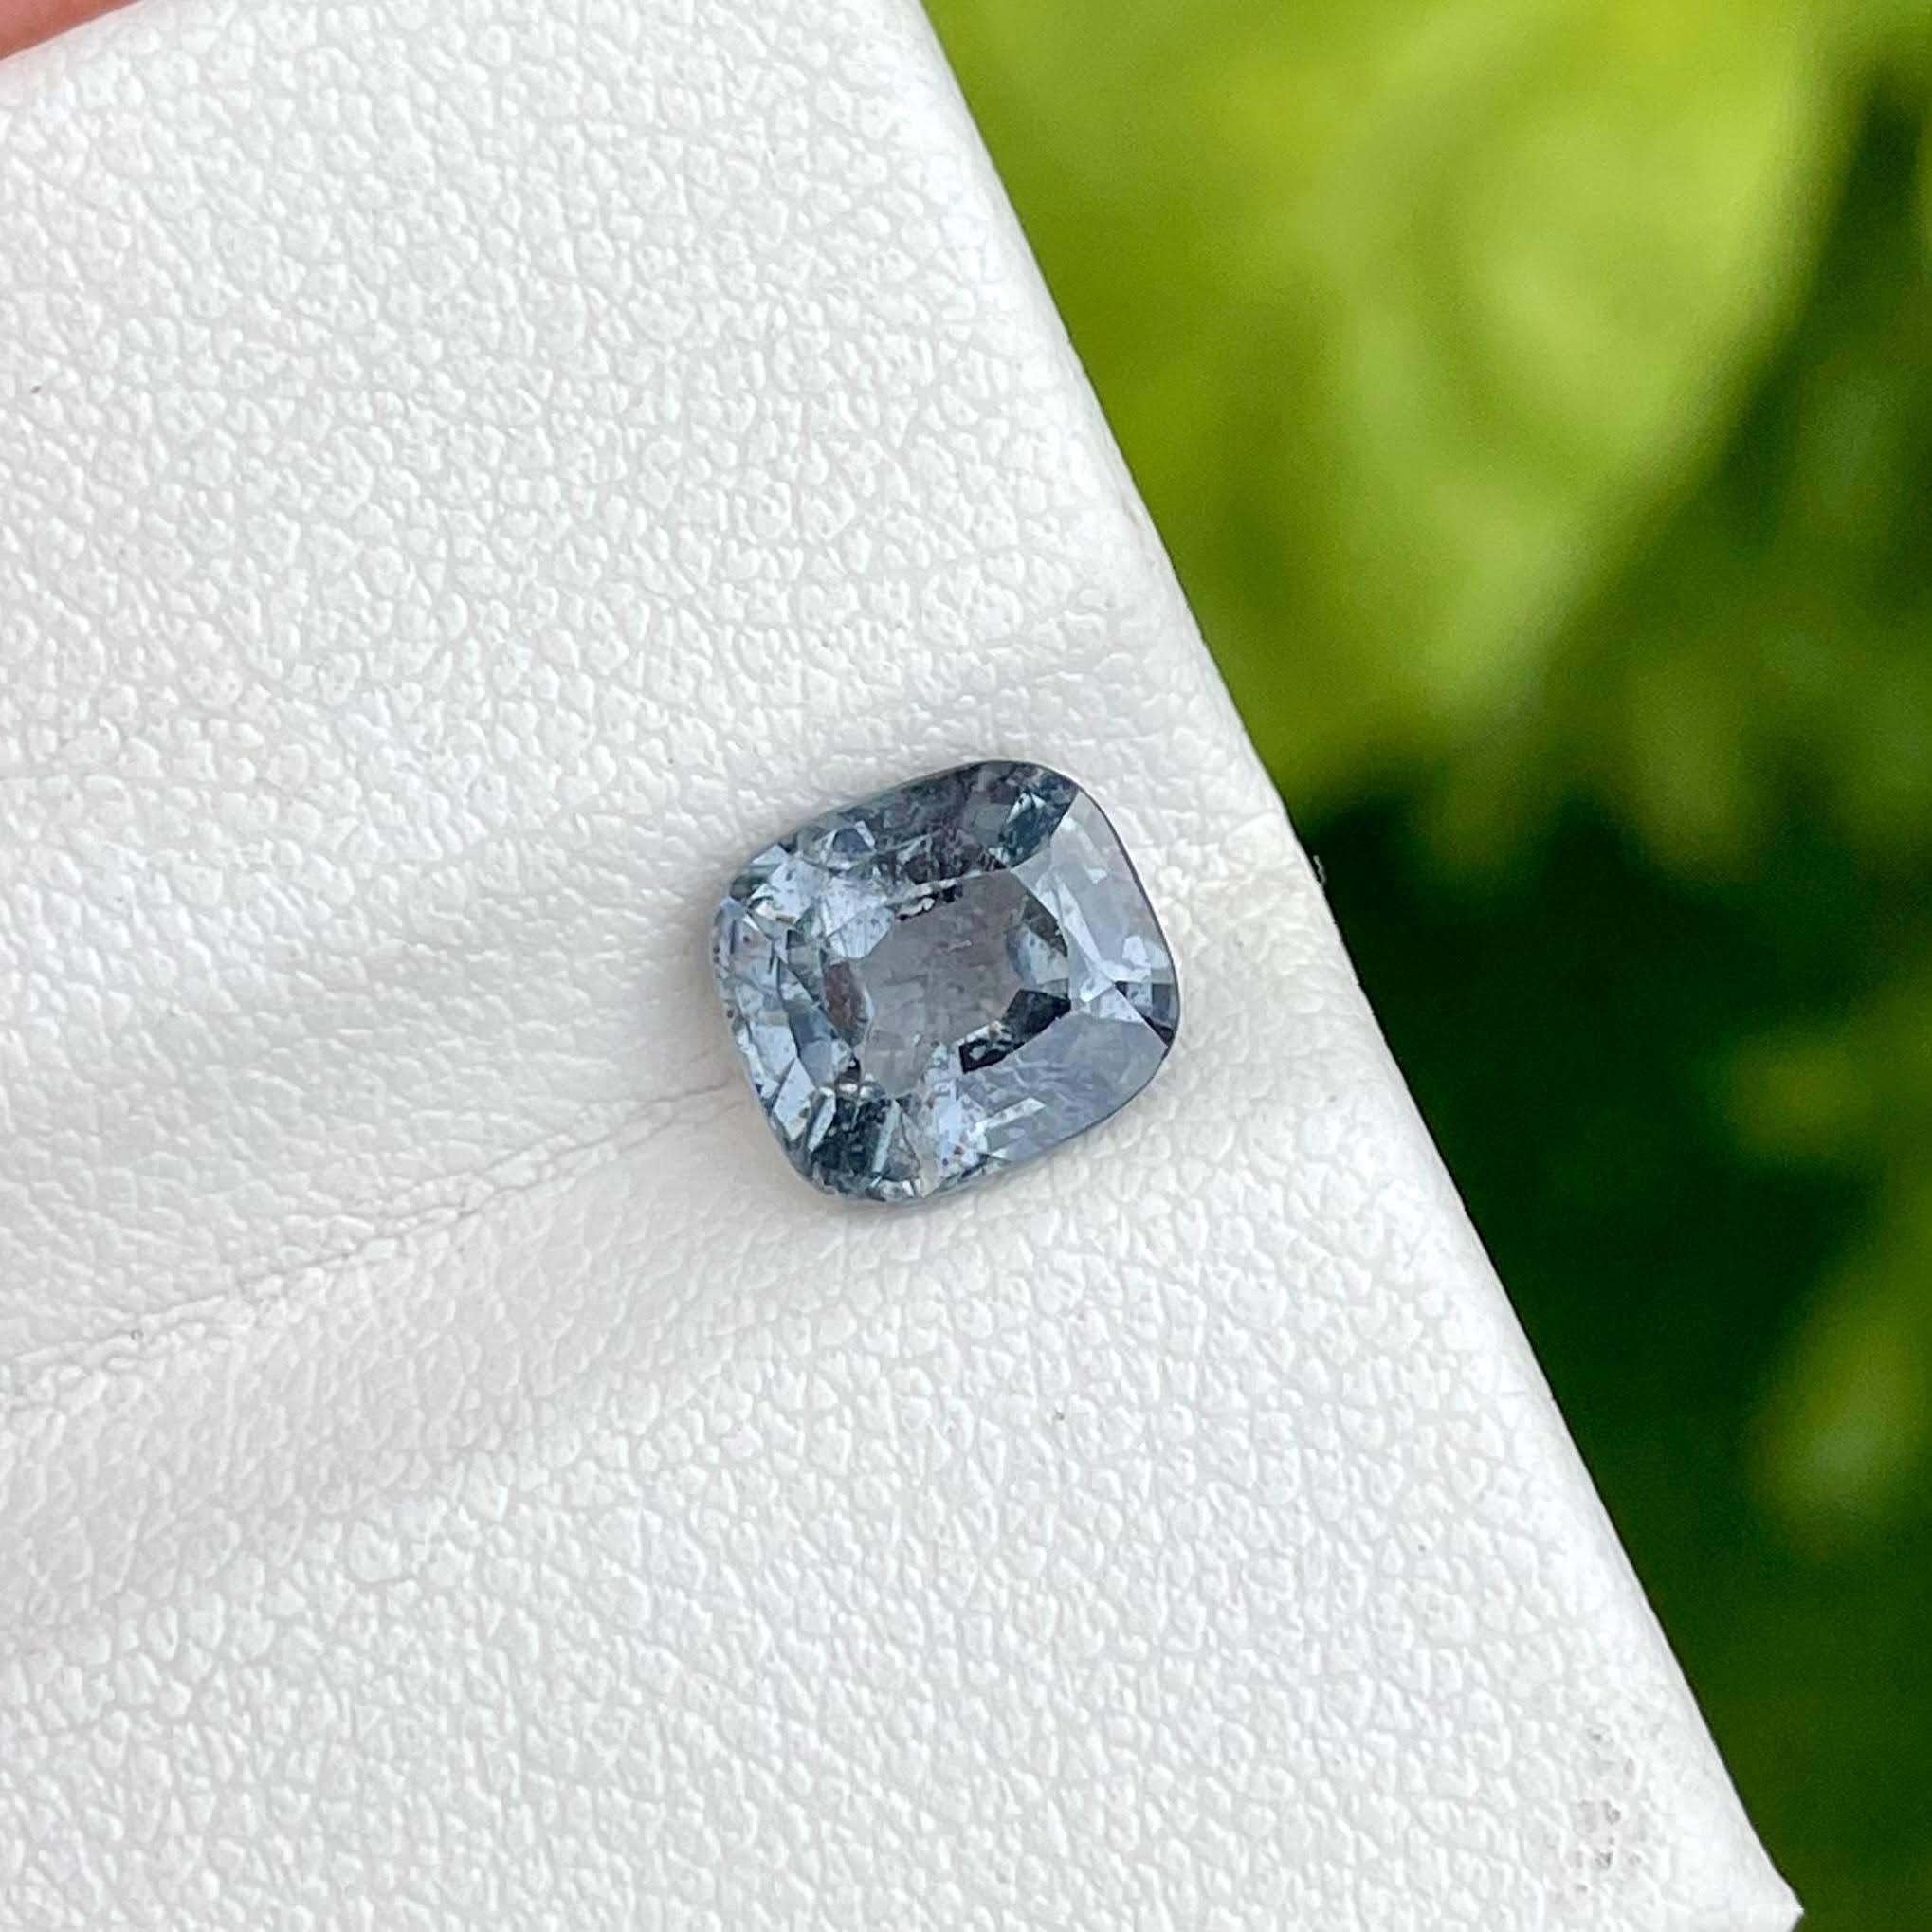 Weight 1.75 carats 
Dimensions 7.5x6.9x4.1 mm
Treatment none 
Origin Burma 
Clarity SI
Shape cushion 
Cut cushion 




This stunning 1.75 carats Gray Burmese Spinel Stone is a natural gemstone of exceptional beauty and rarity. Expertly cut into a